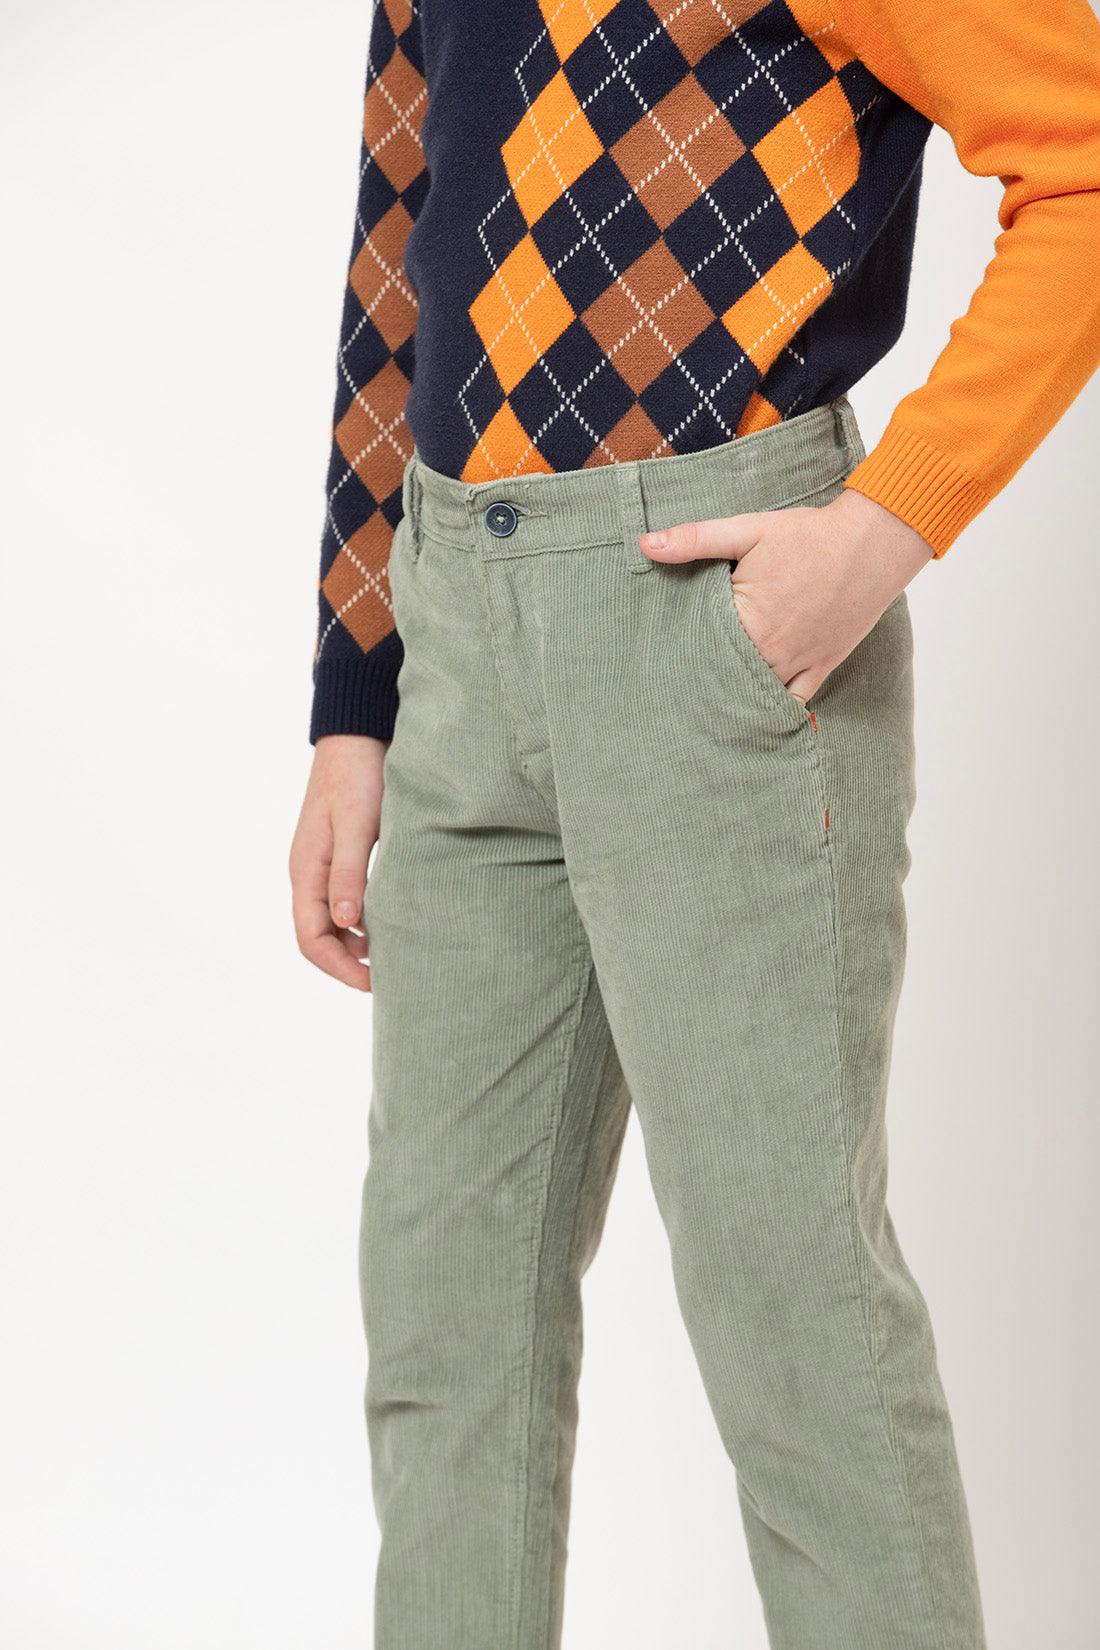 One Friday Varsity Chic Sage Green Adventure Trousers for Boys - One Friday World